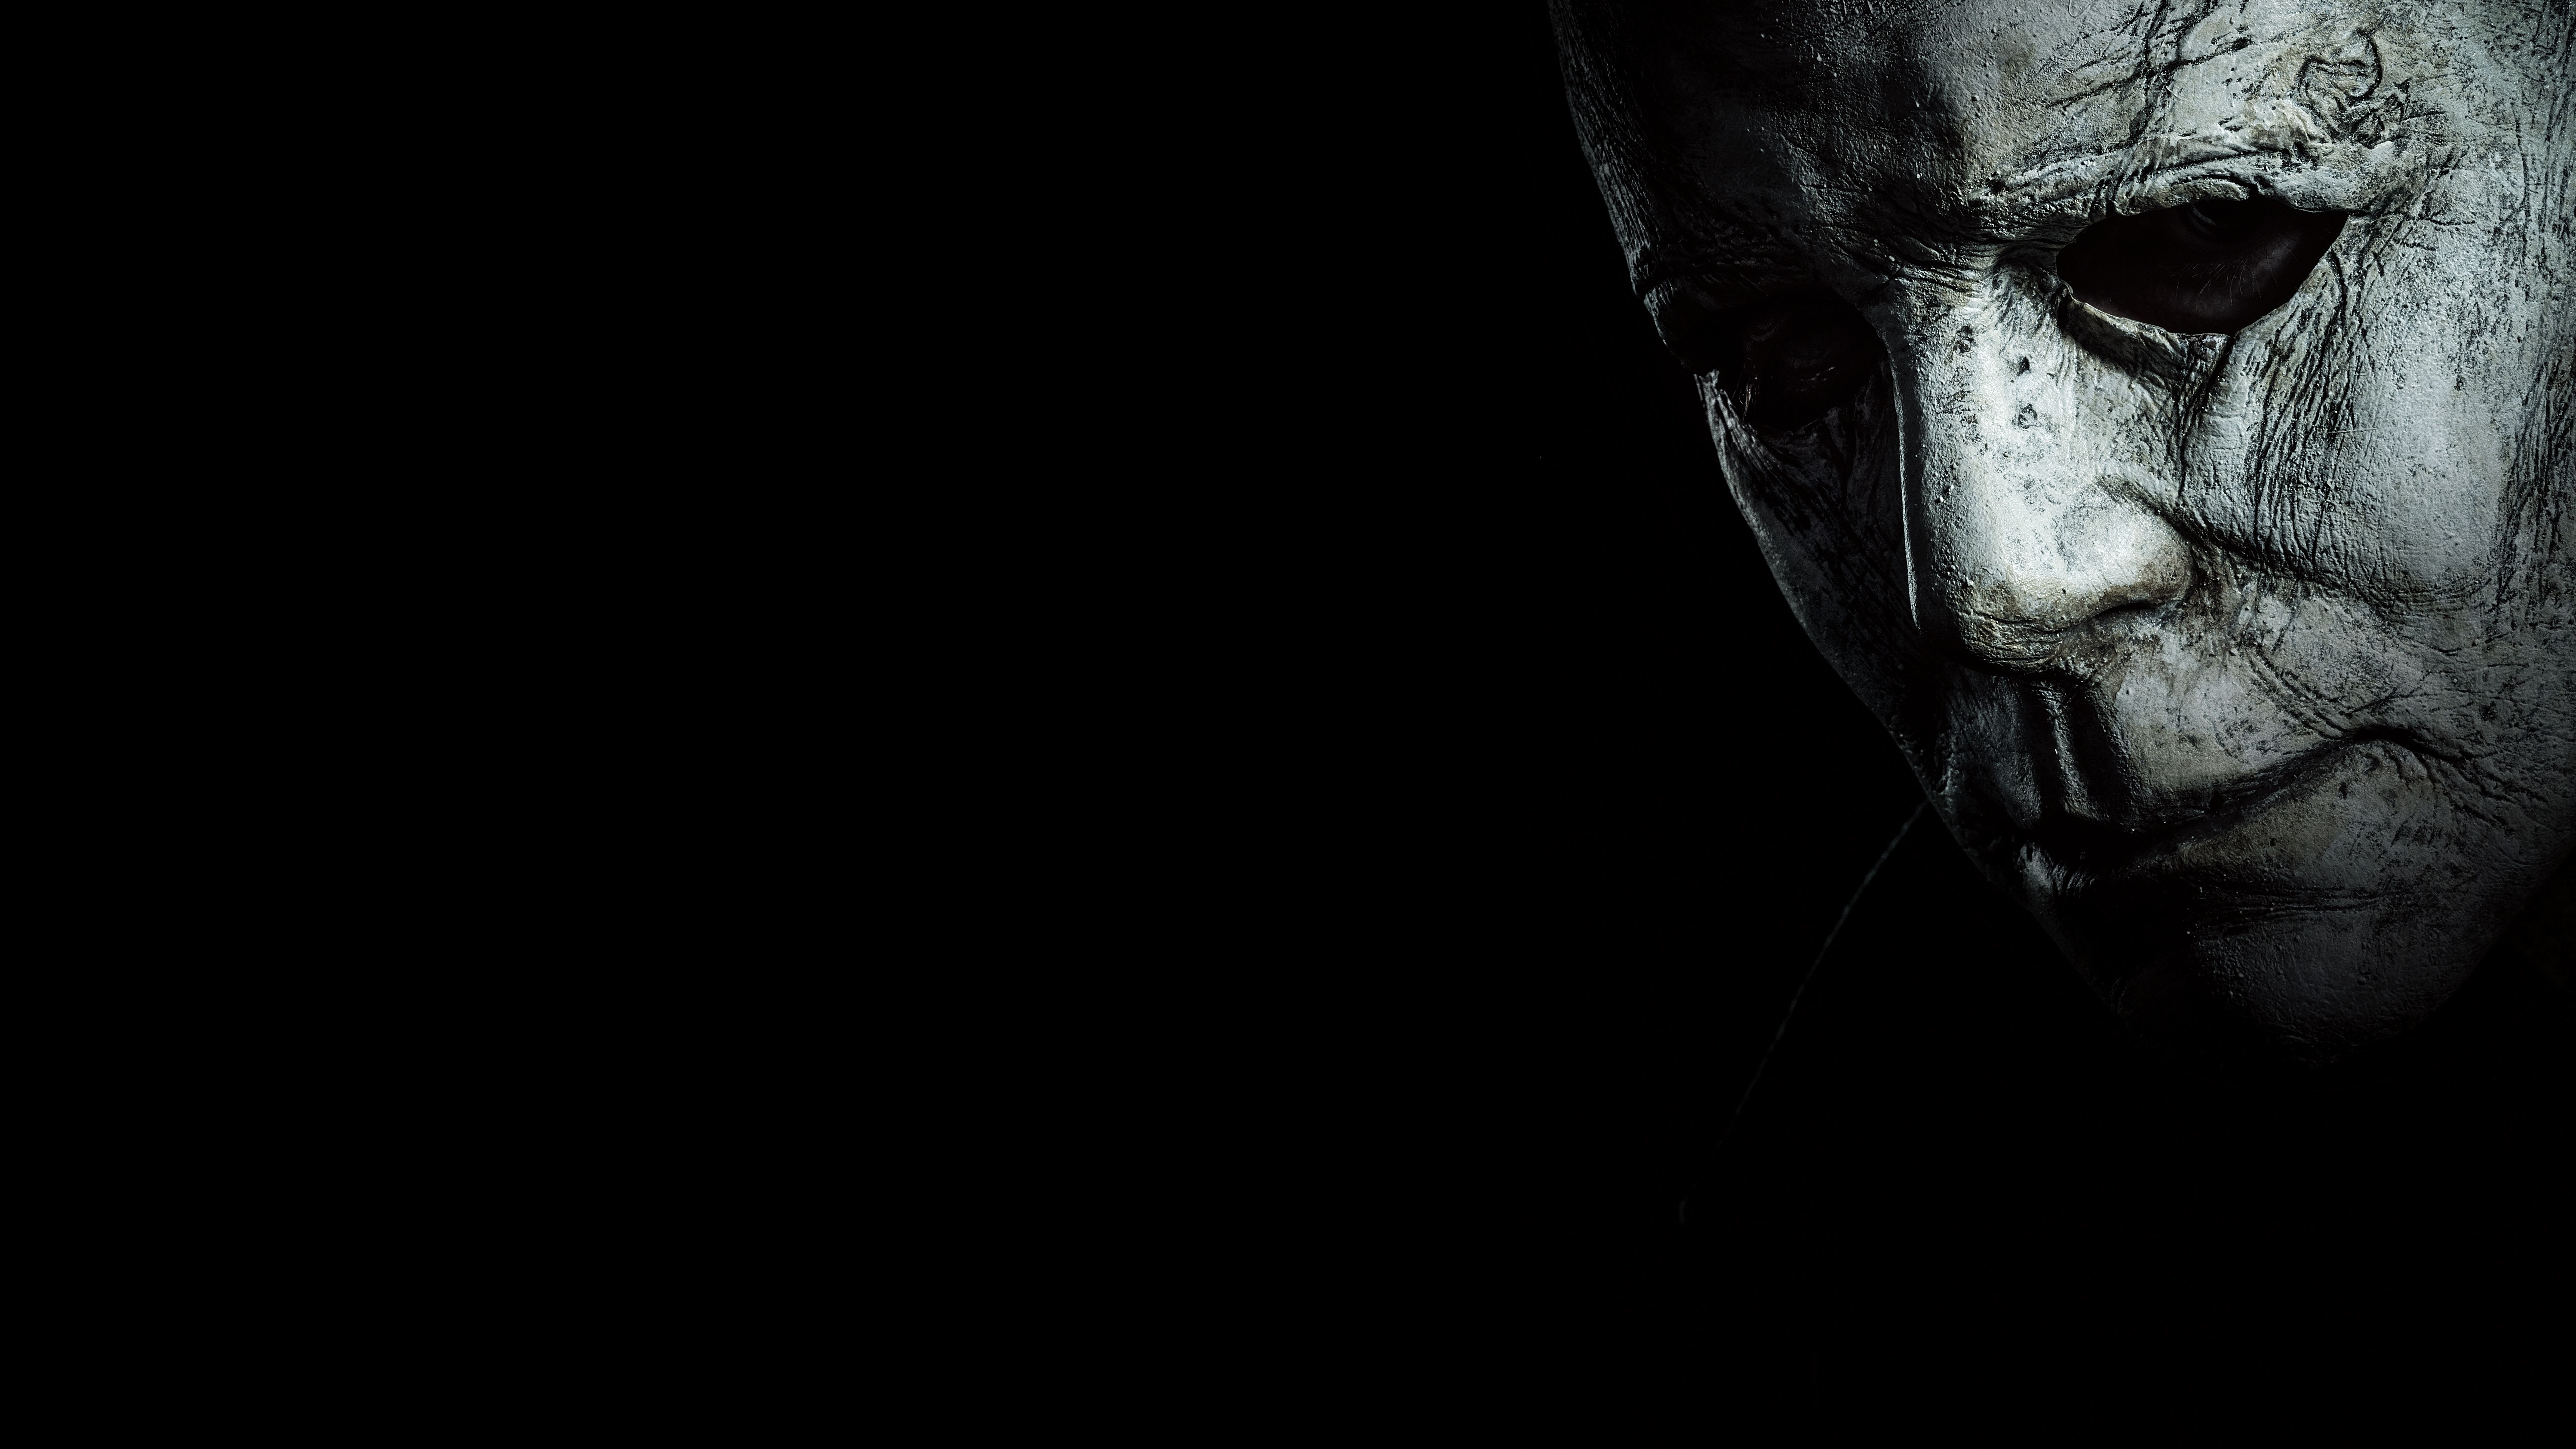 Michael Myers Wallpaper Browse Michael Myers Wallpaper with collections of  Android Animated Compu  Michael myers Michael myers halloween Classic  horror movies